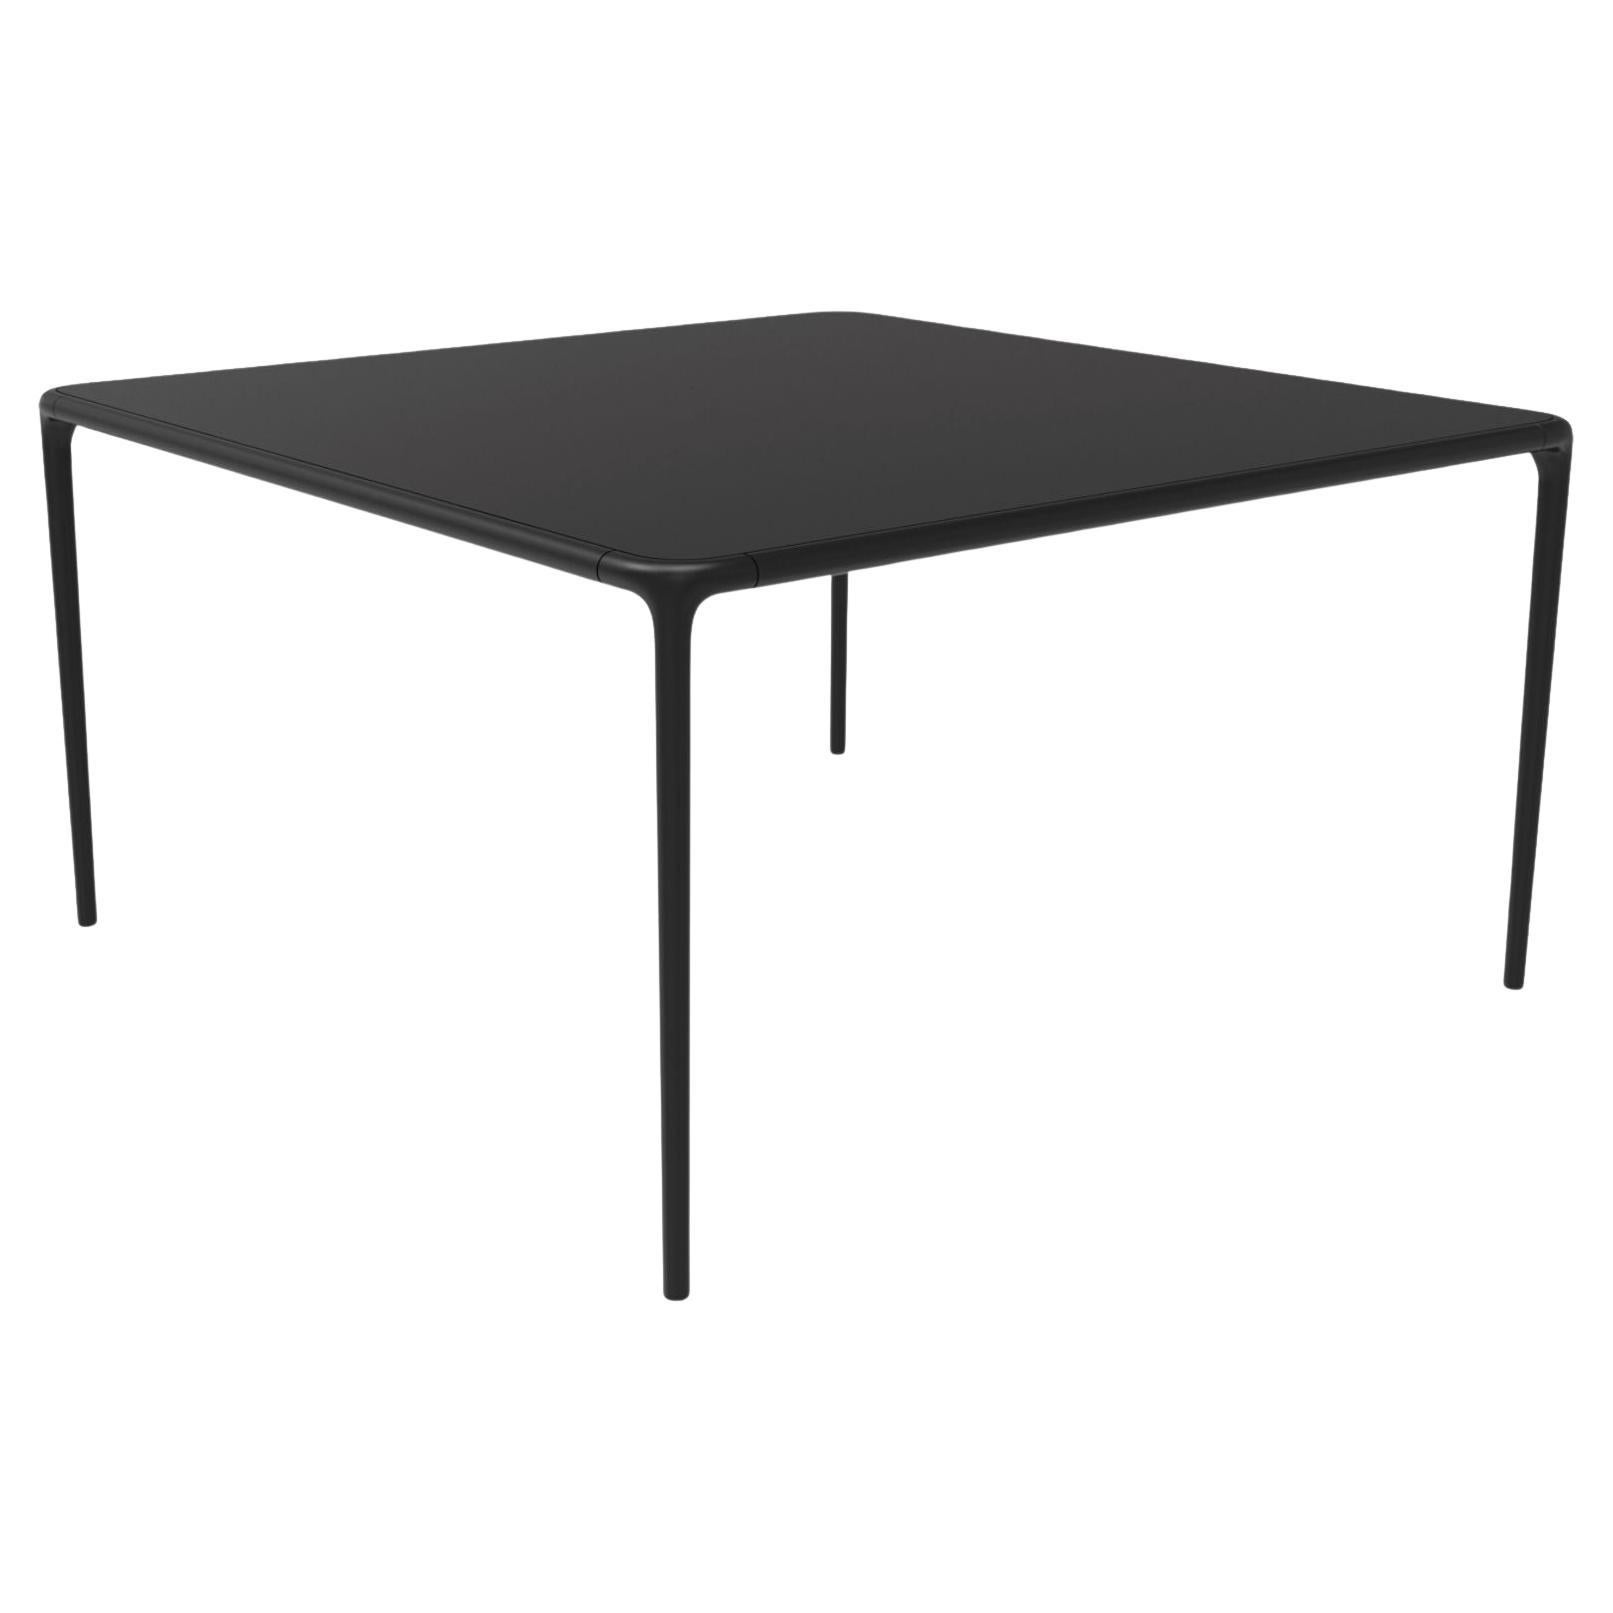 Xaloc Black Glass Top Table 140 by Mowee For Sale